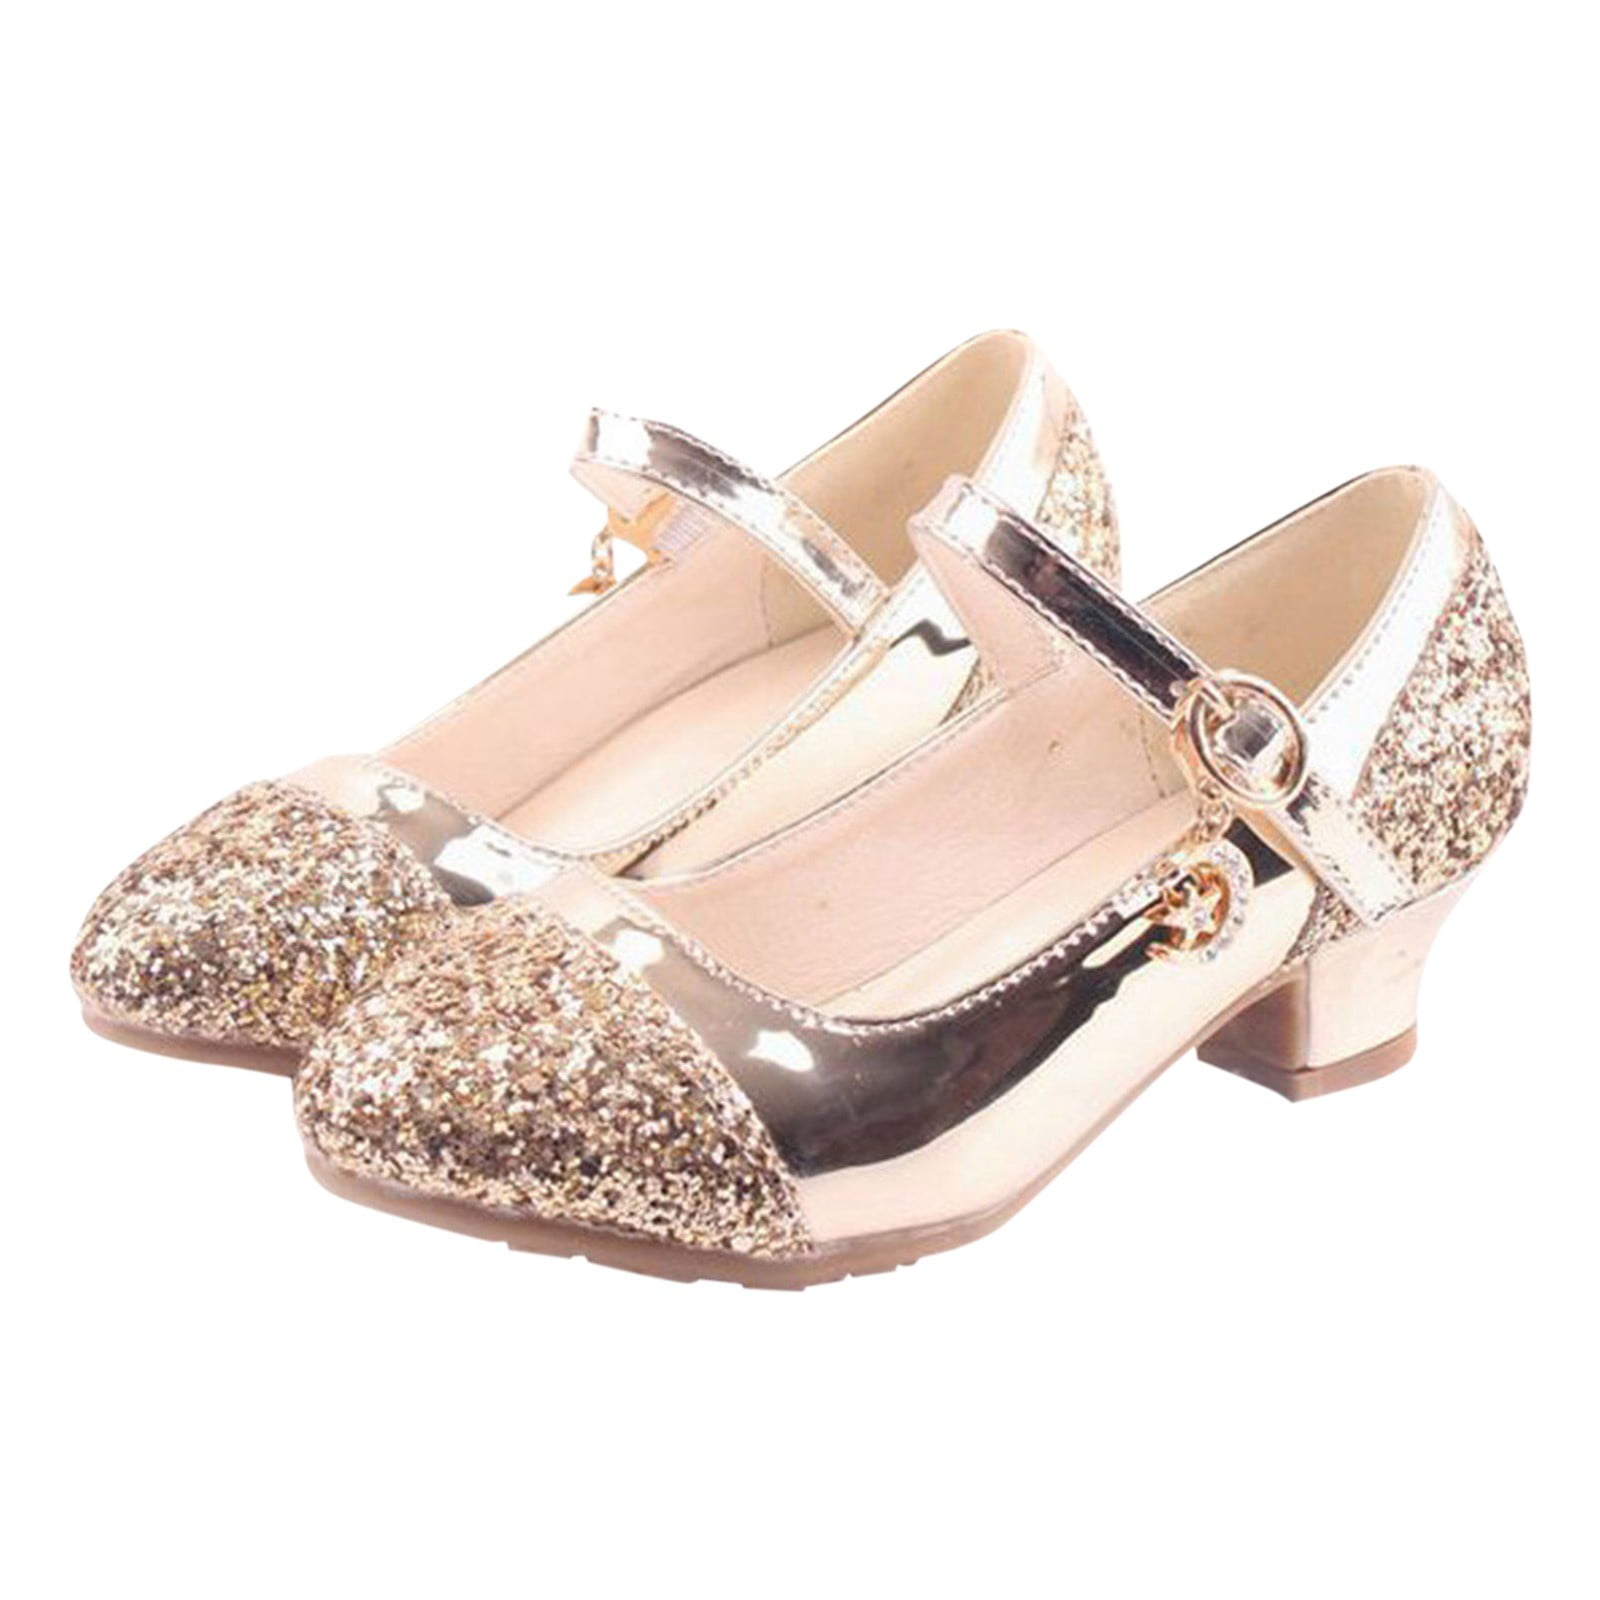 What Shoes to Wear with a Gold Sparkly Dress - Weddings, Casual Dresses and  More